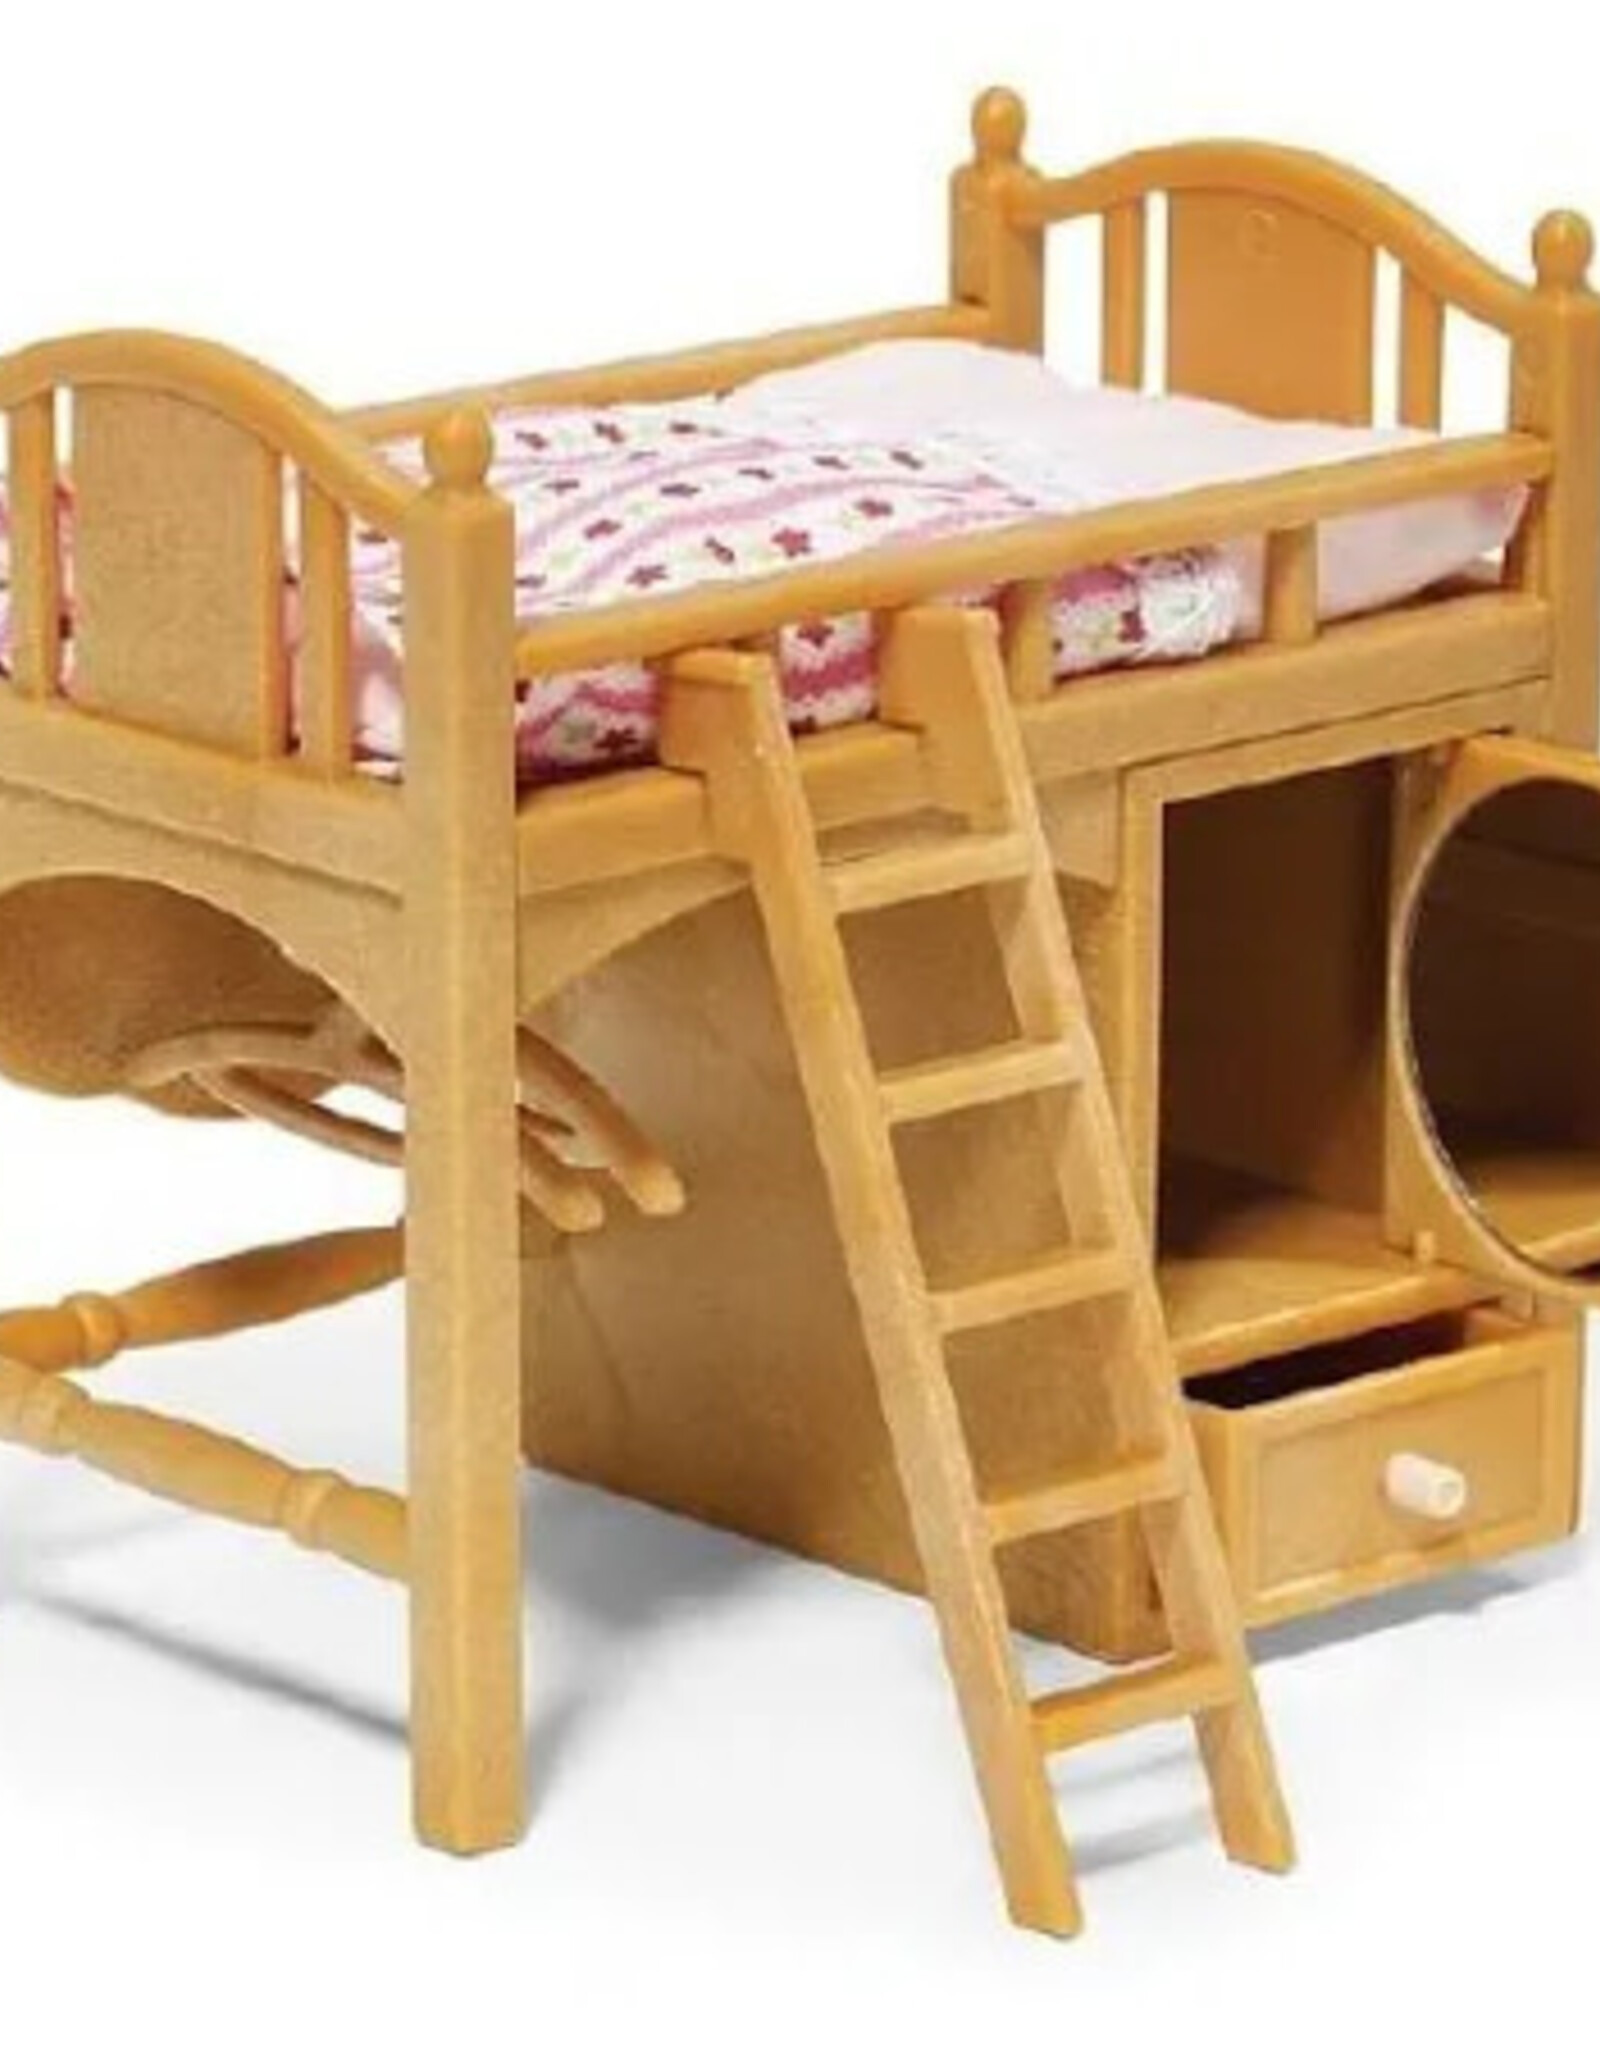 Calico Critters Calico Critter Loft Bed